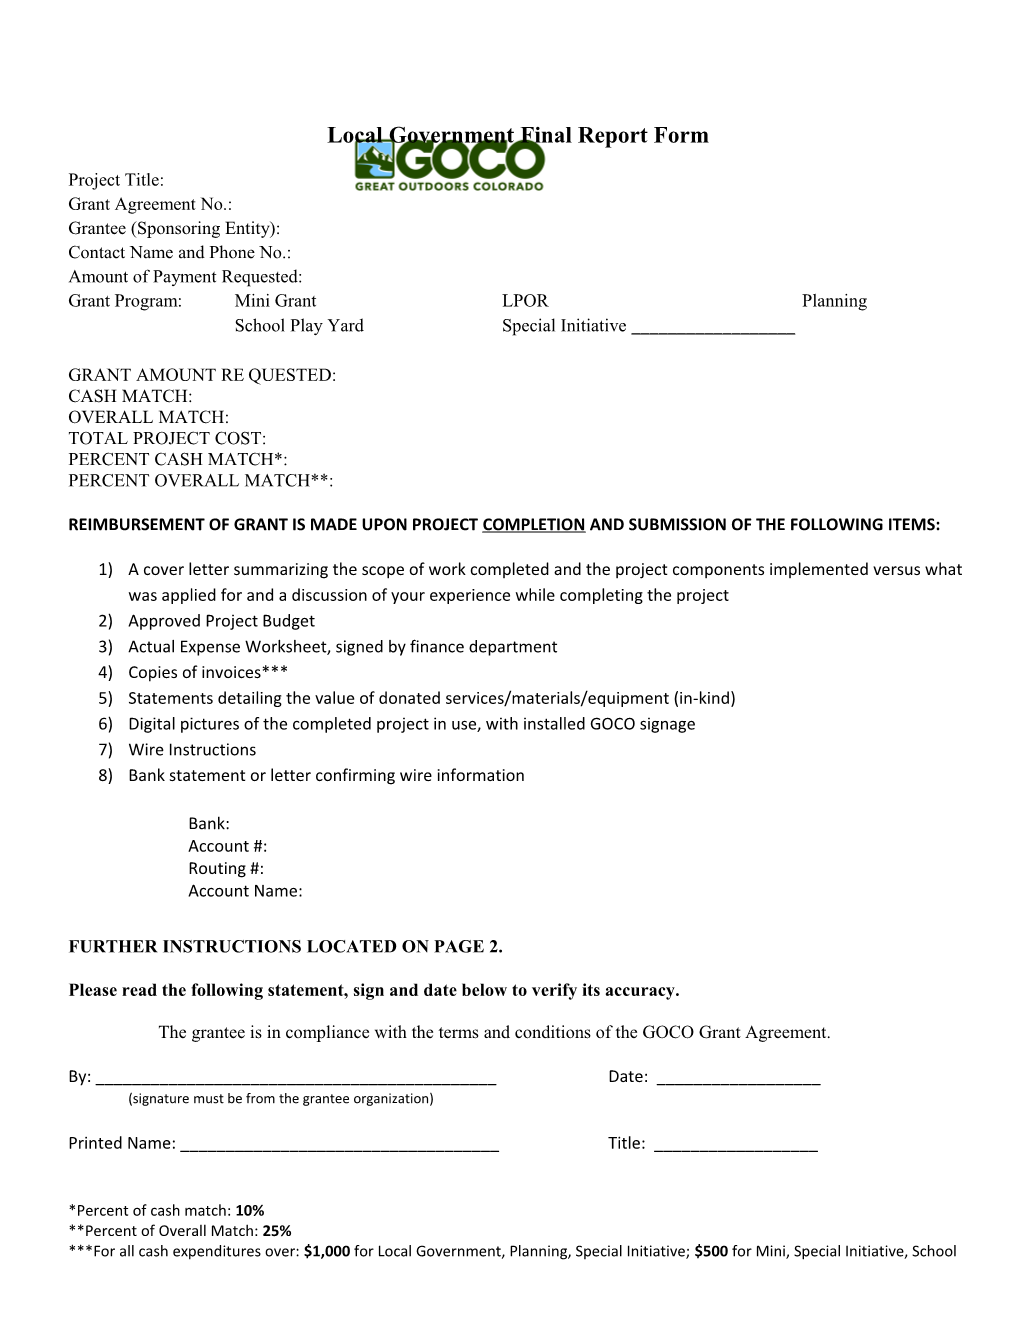 Local Government Final Report Form